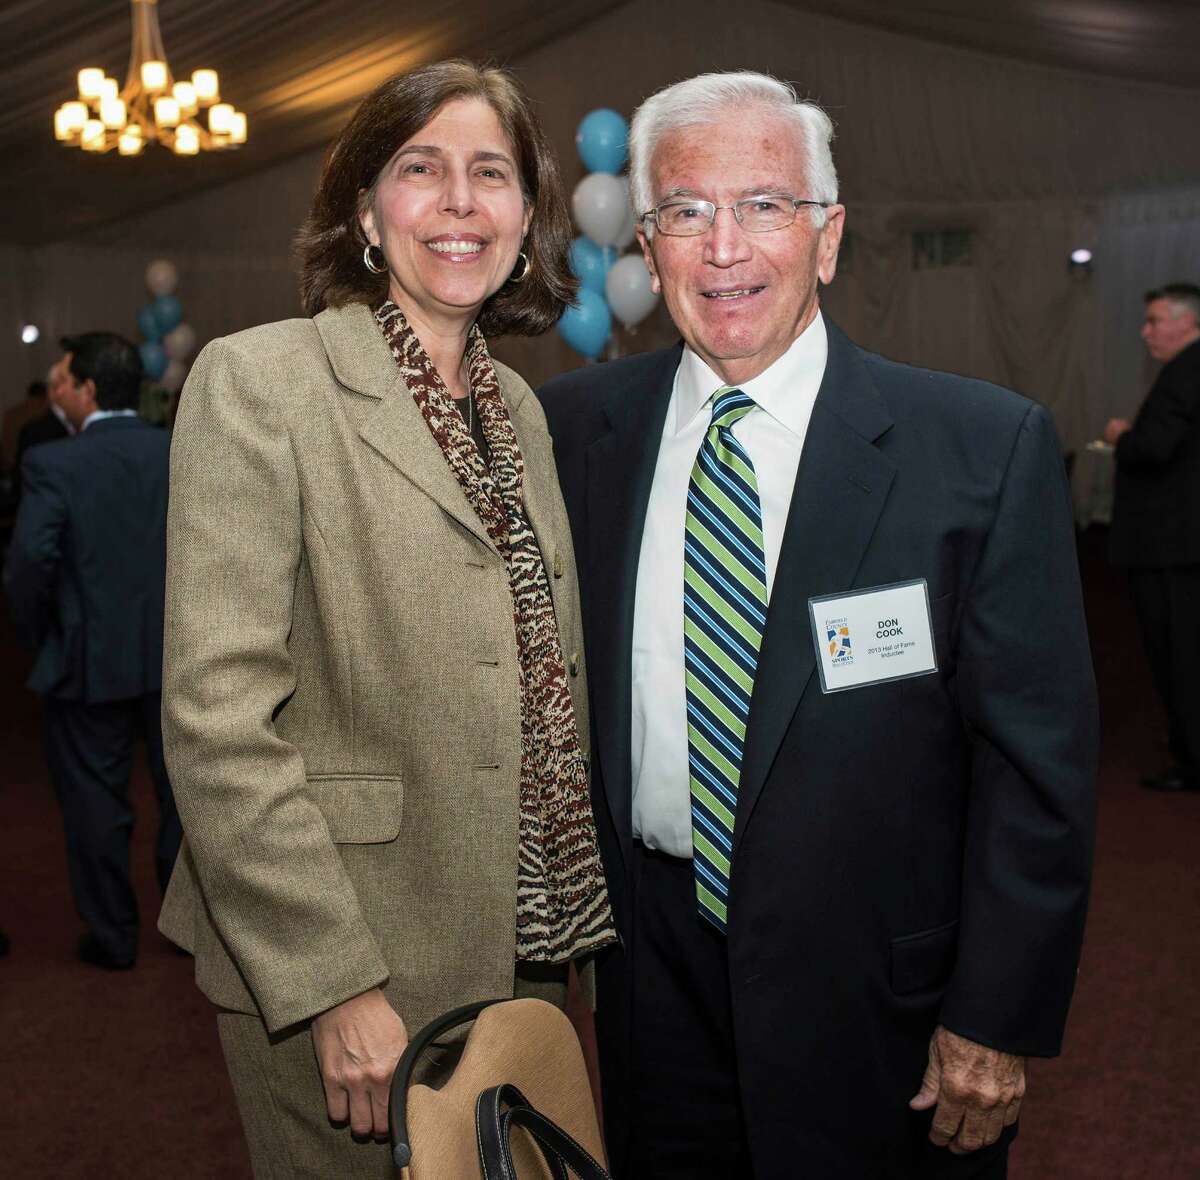 Community service award winner, Don Cook with Janet Canepa at the 9th annual Fairfield County Sports Hall of Fame Sports Night held at the Greenwich Hyatt Regency, Greenwich, CT on Monday, October, 21st, 2013.